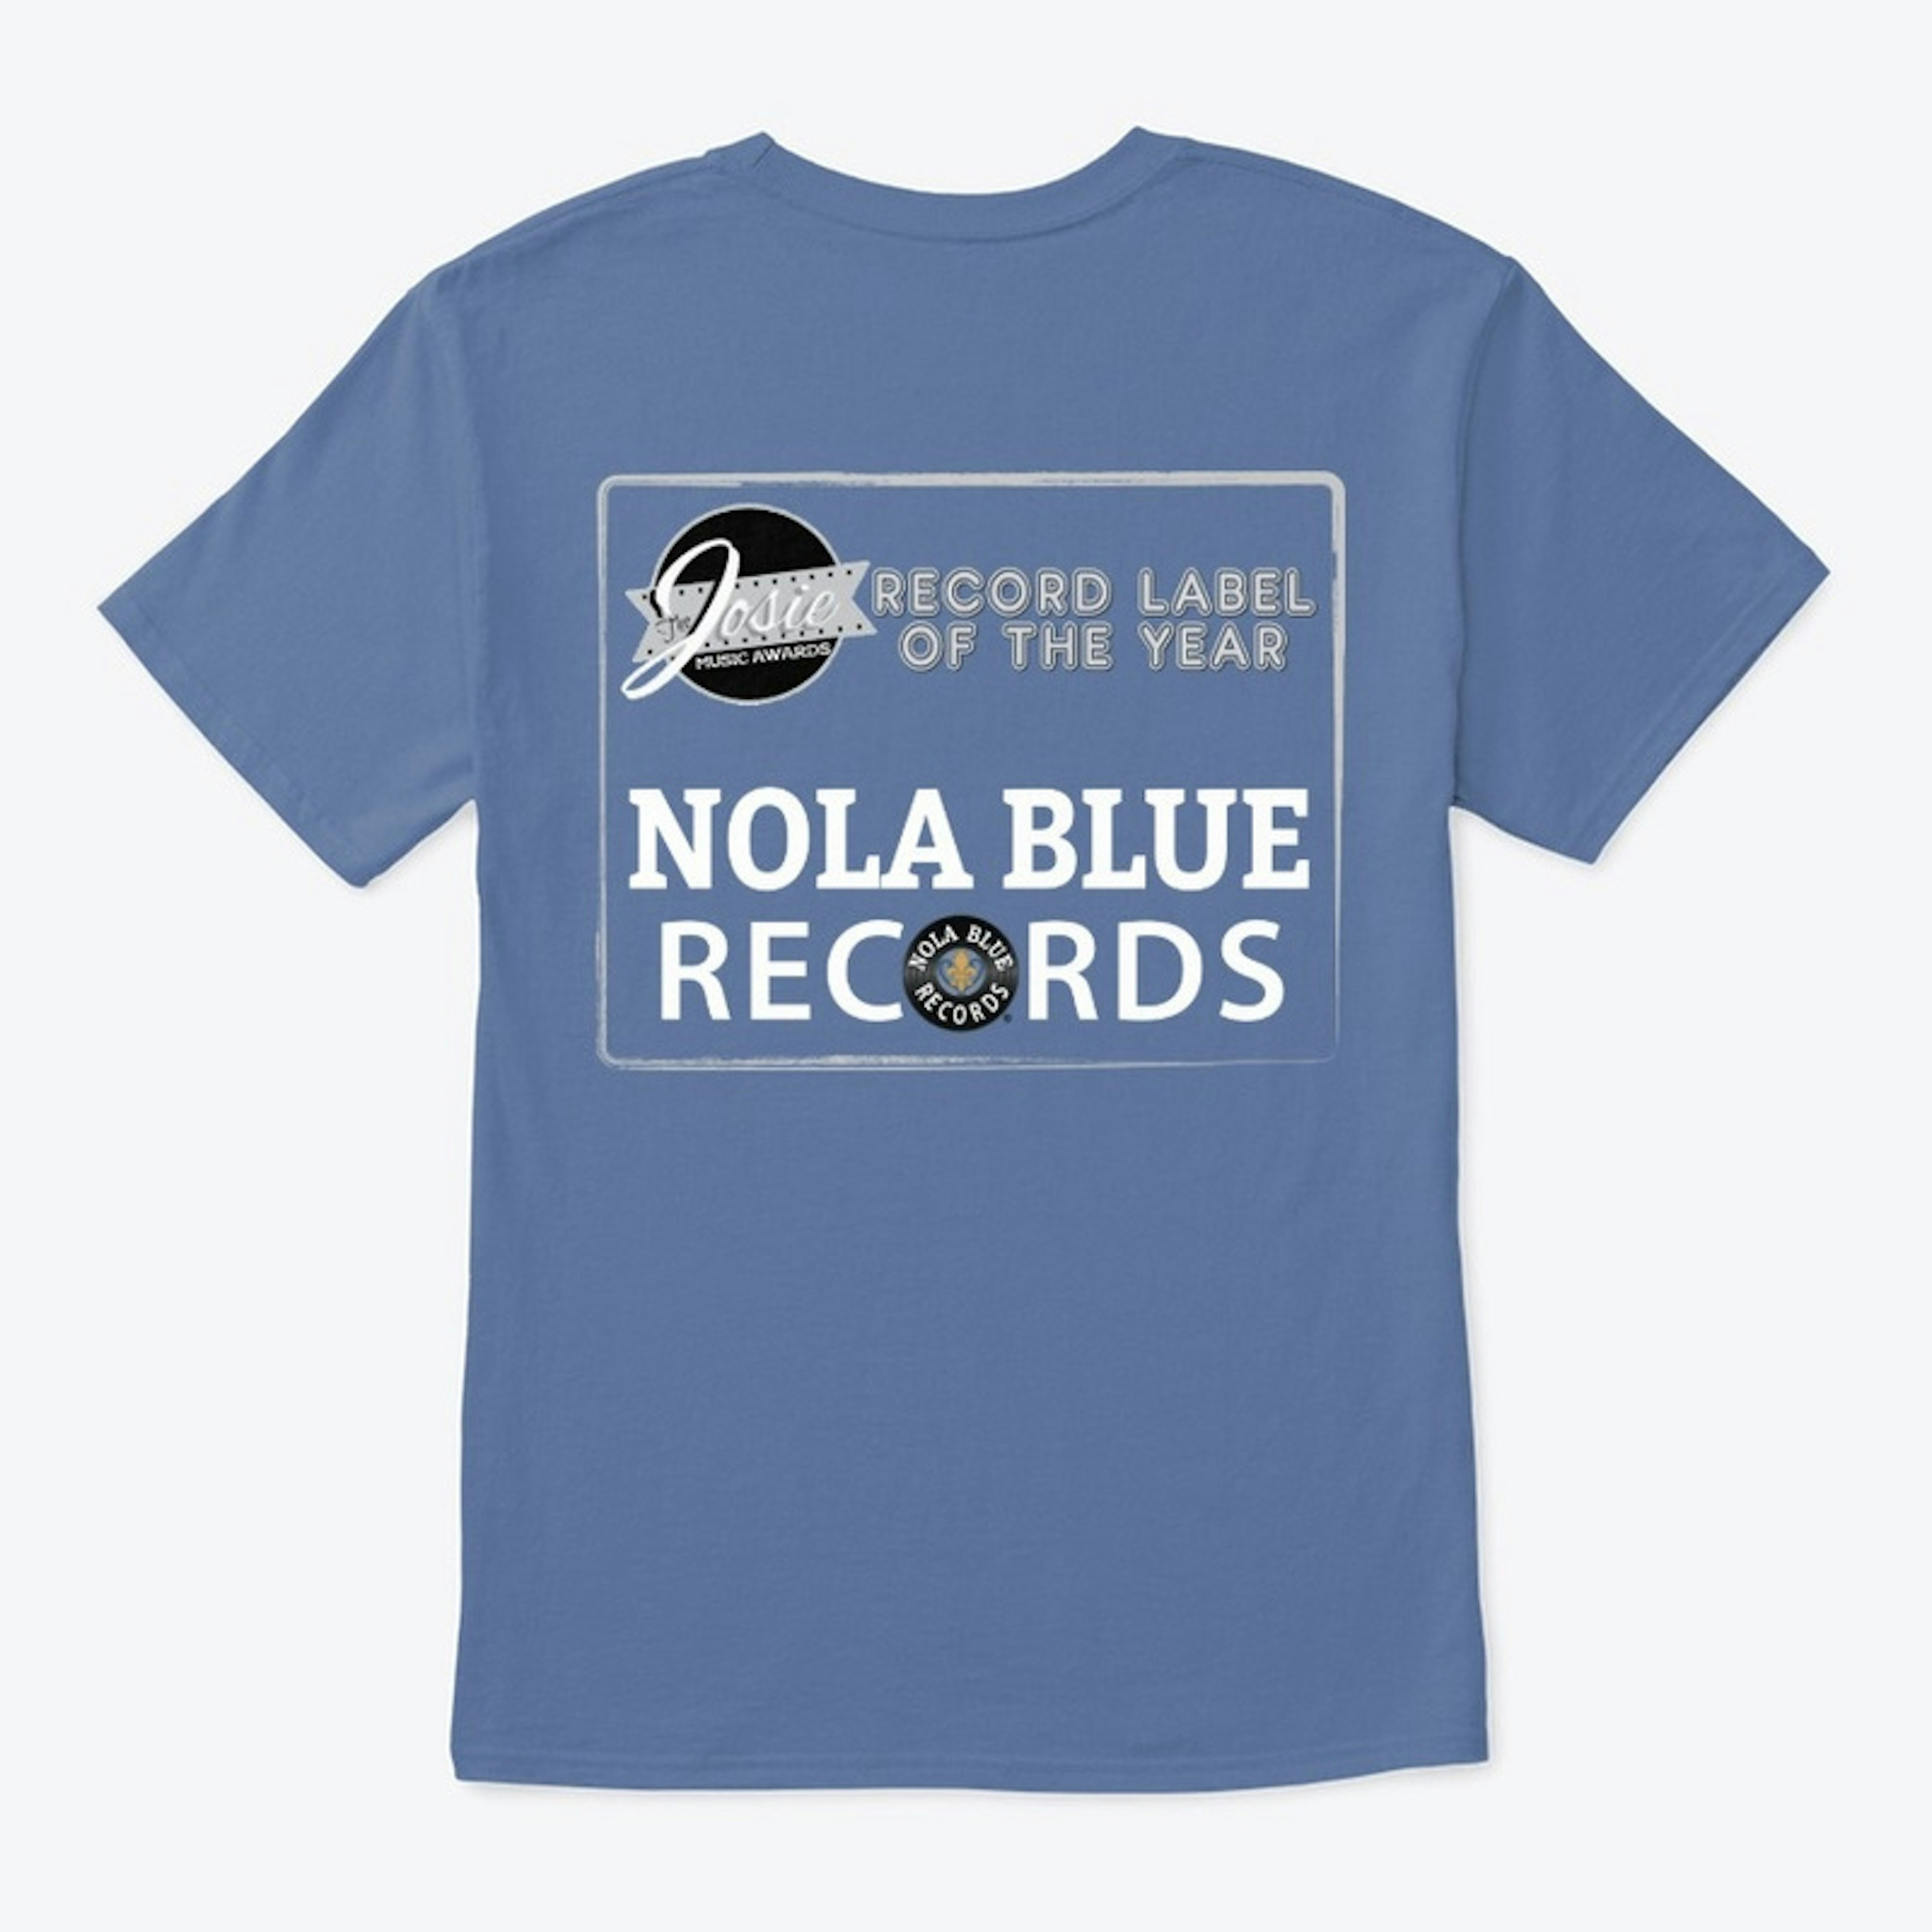 Nola Blue "Record Label of the Year"